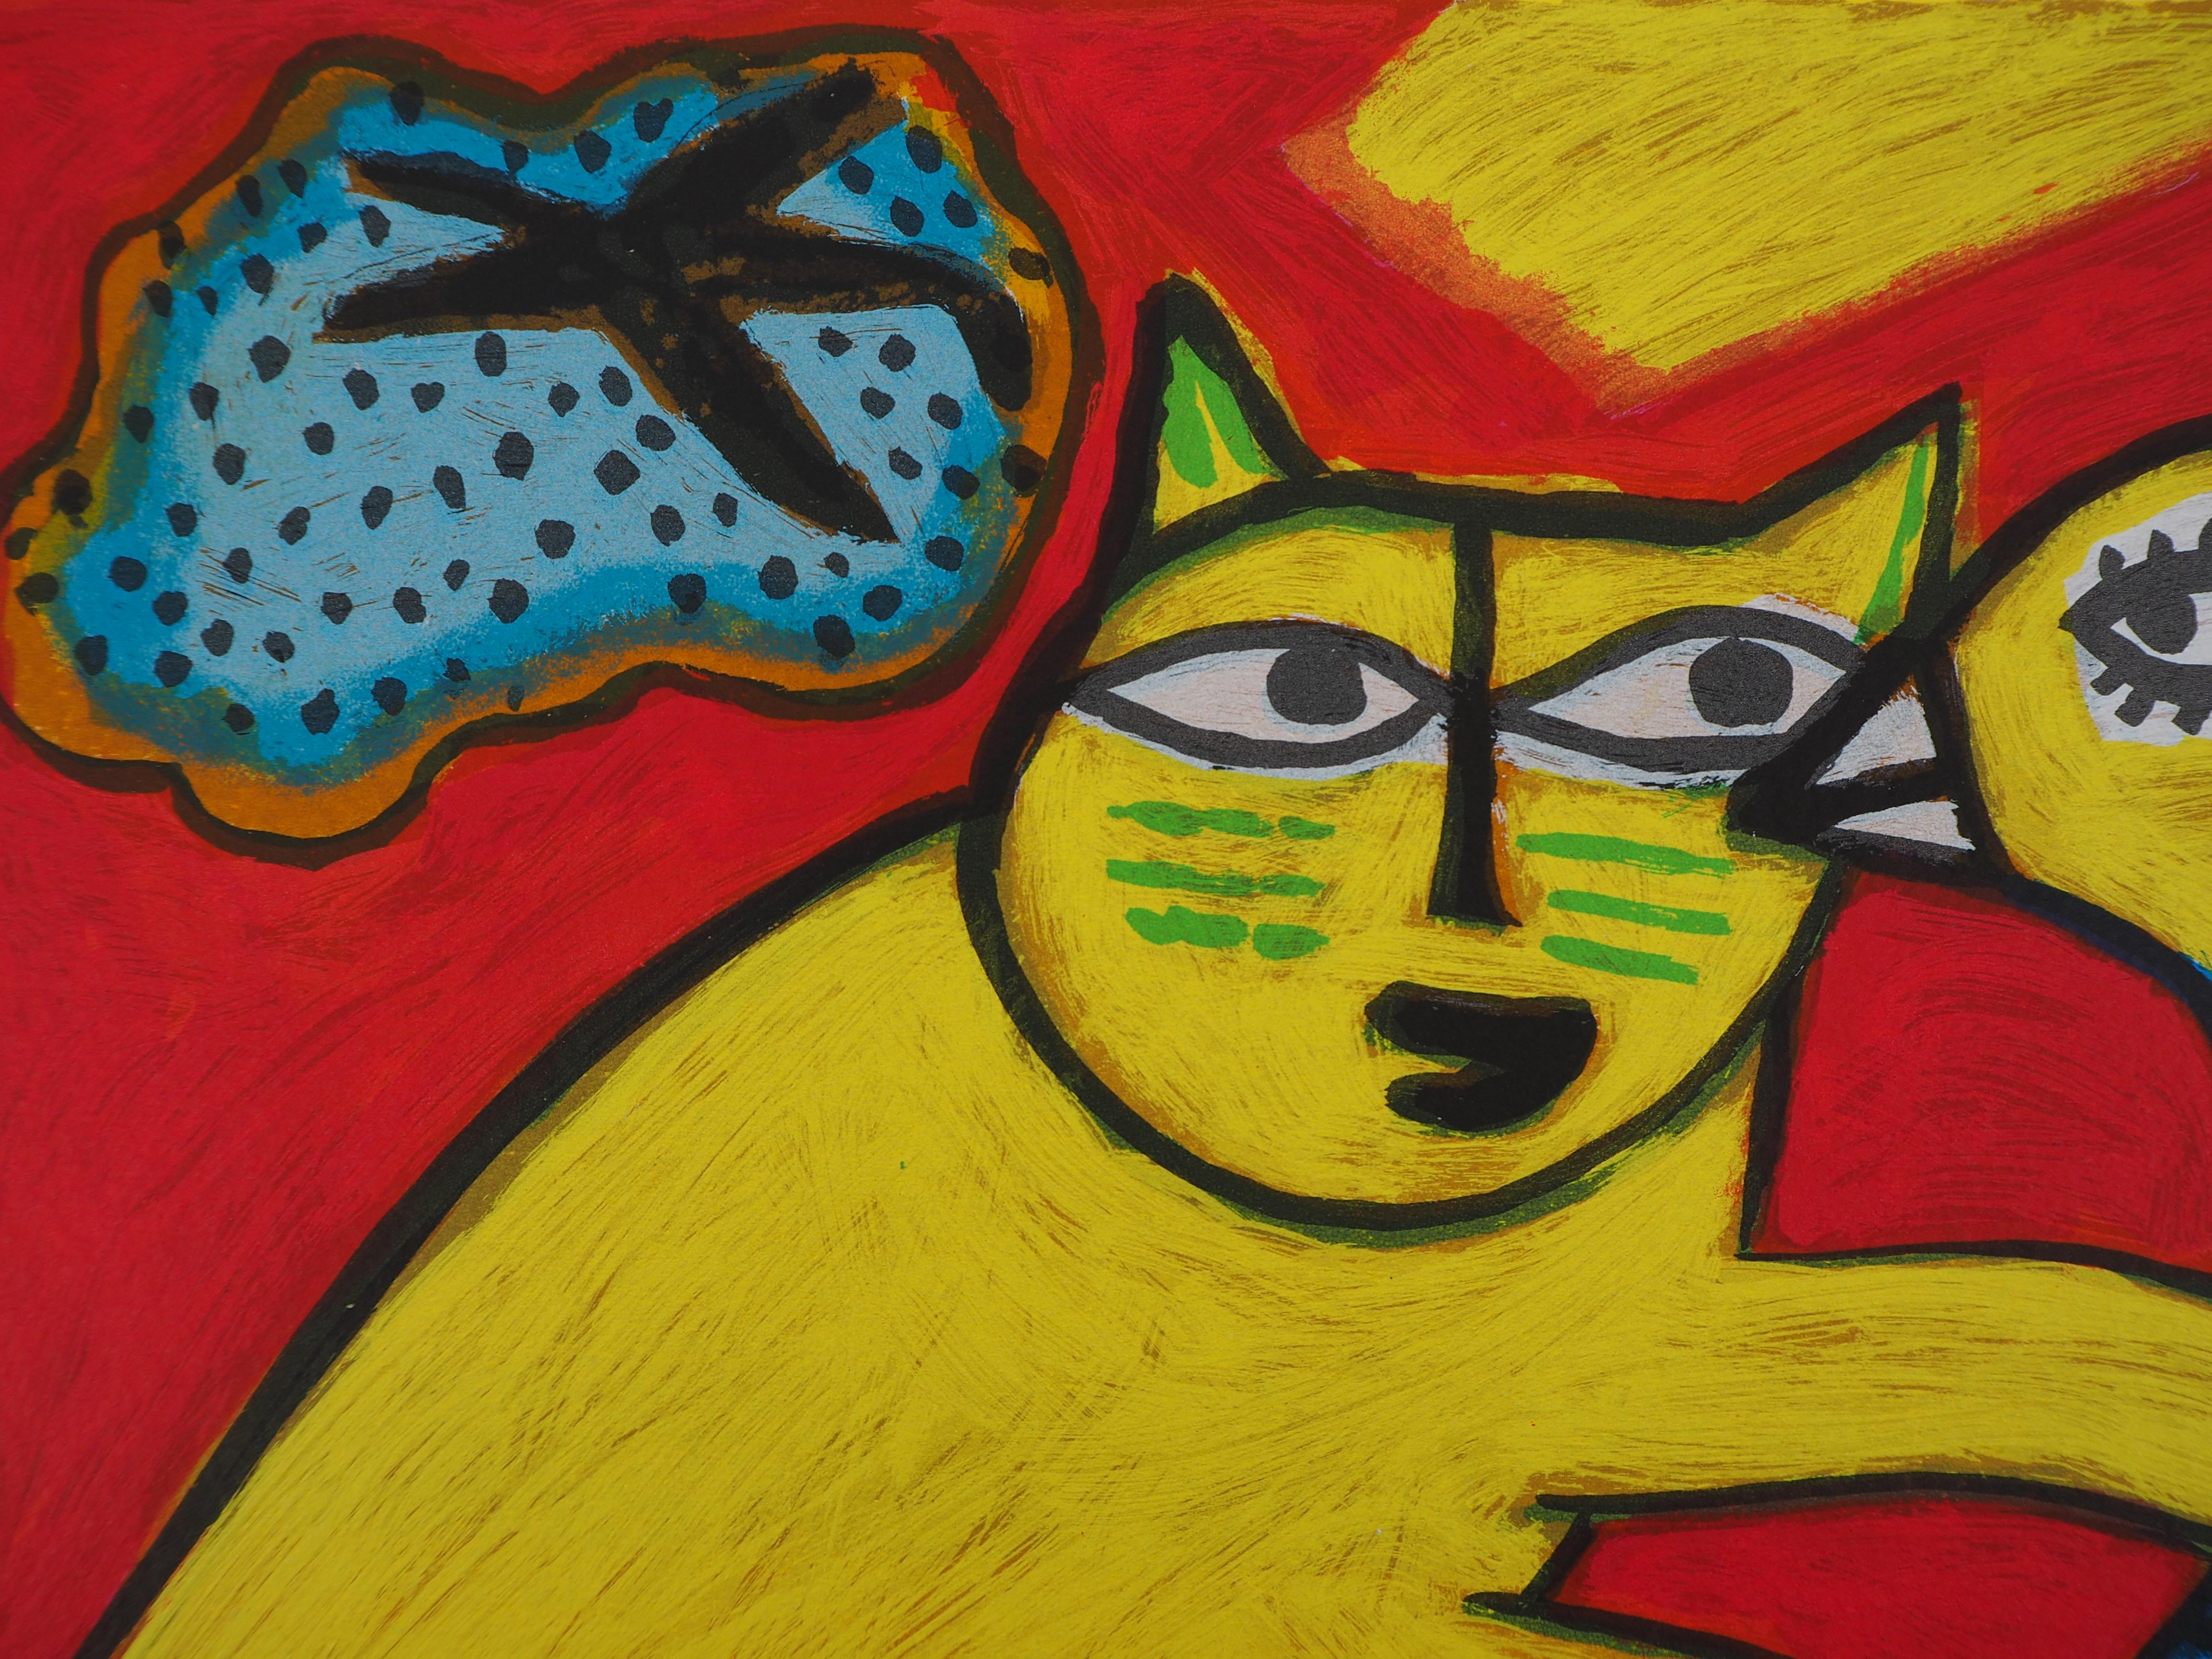 Corneille
Cat and Bird in Love, 2000

Original lithograph 
Handsigned
Numbered EA /60
On vellum 37 x 44 cm (c. 15 x 18inch)
 
Excellent condition